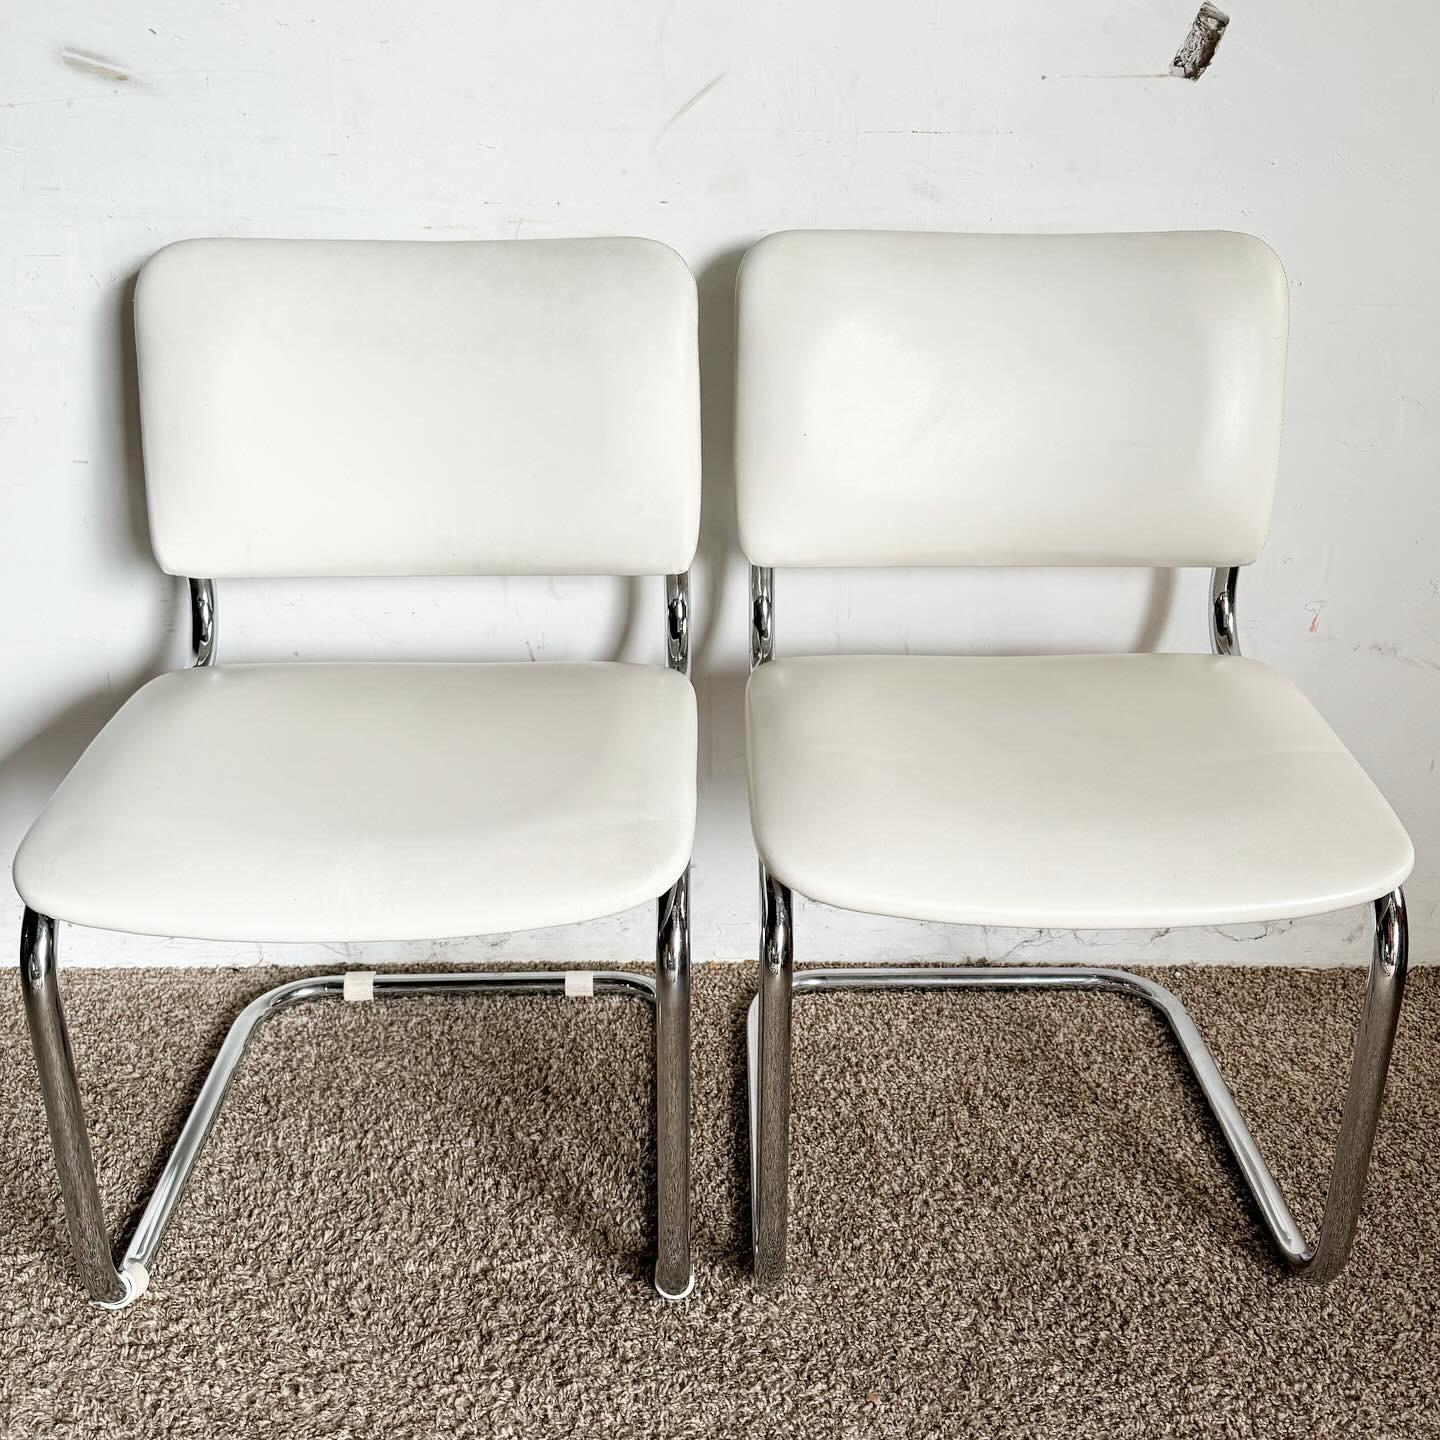 The Elegant Mid-Century Chrome Dining Chairs by Loewenstein/Oggo combine style and comfort. Featuring chrome cantilever frames and white vinyl upholstery, they epitomize mid-century modern elegance, perfect for any dining setting.
Some marks and